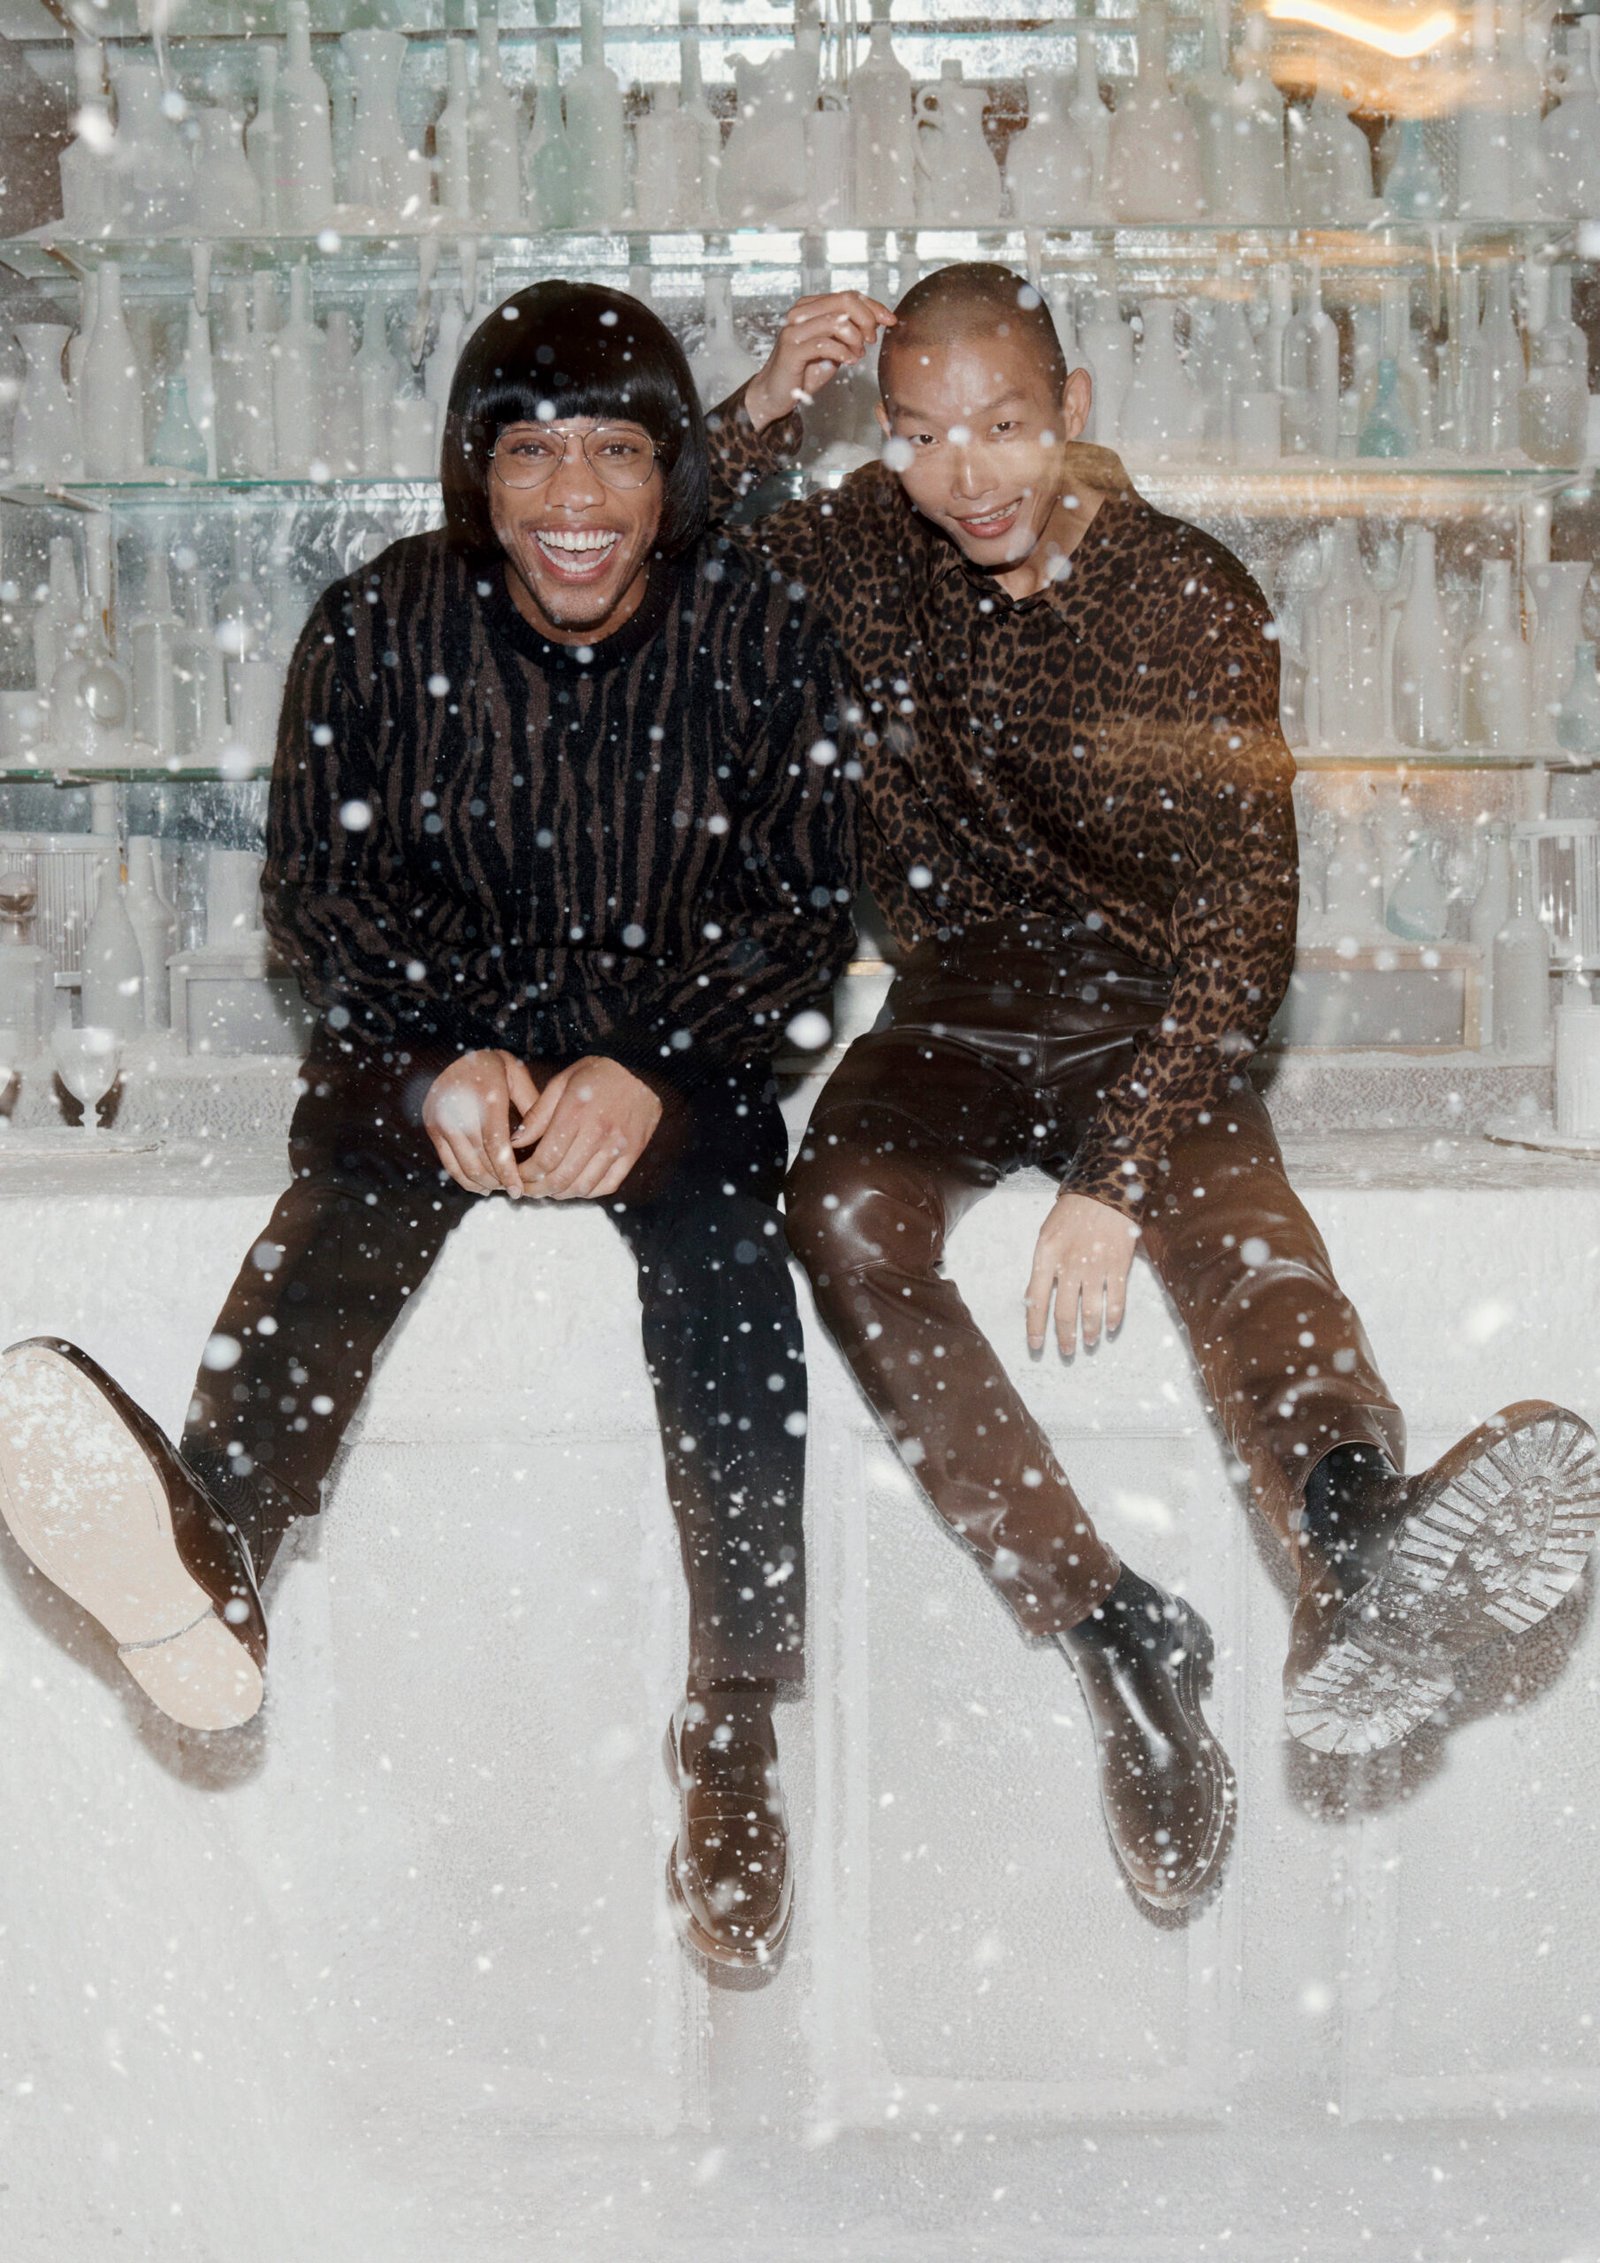 H&M BRASSERIE HENNES RETURNS TO UNLOCK THE MAGIC FOR THE HOLIDAY WITH CHLOË SEVIGNY & ANDERSON PAAK